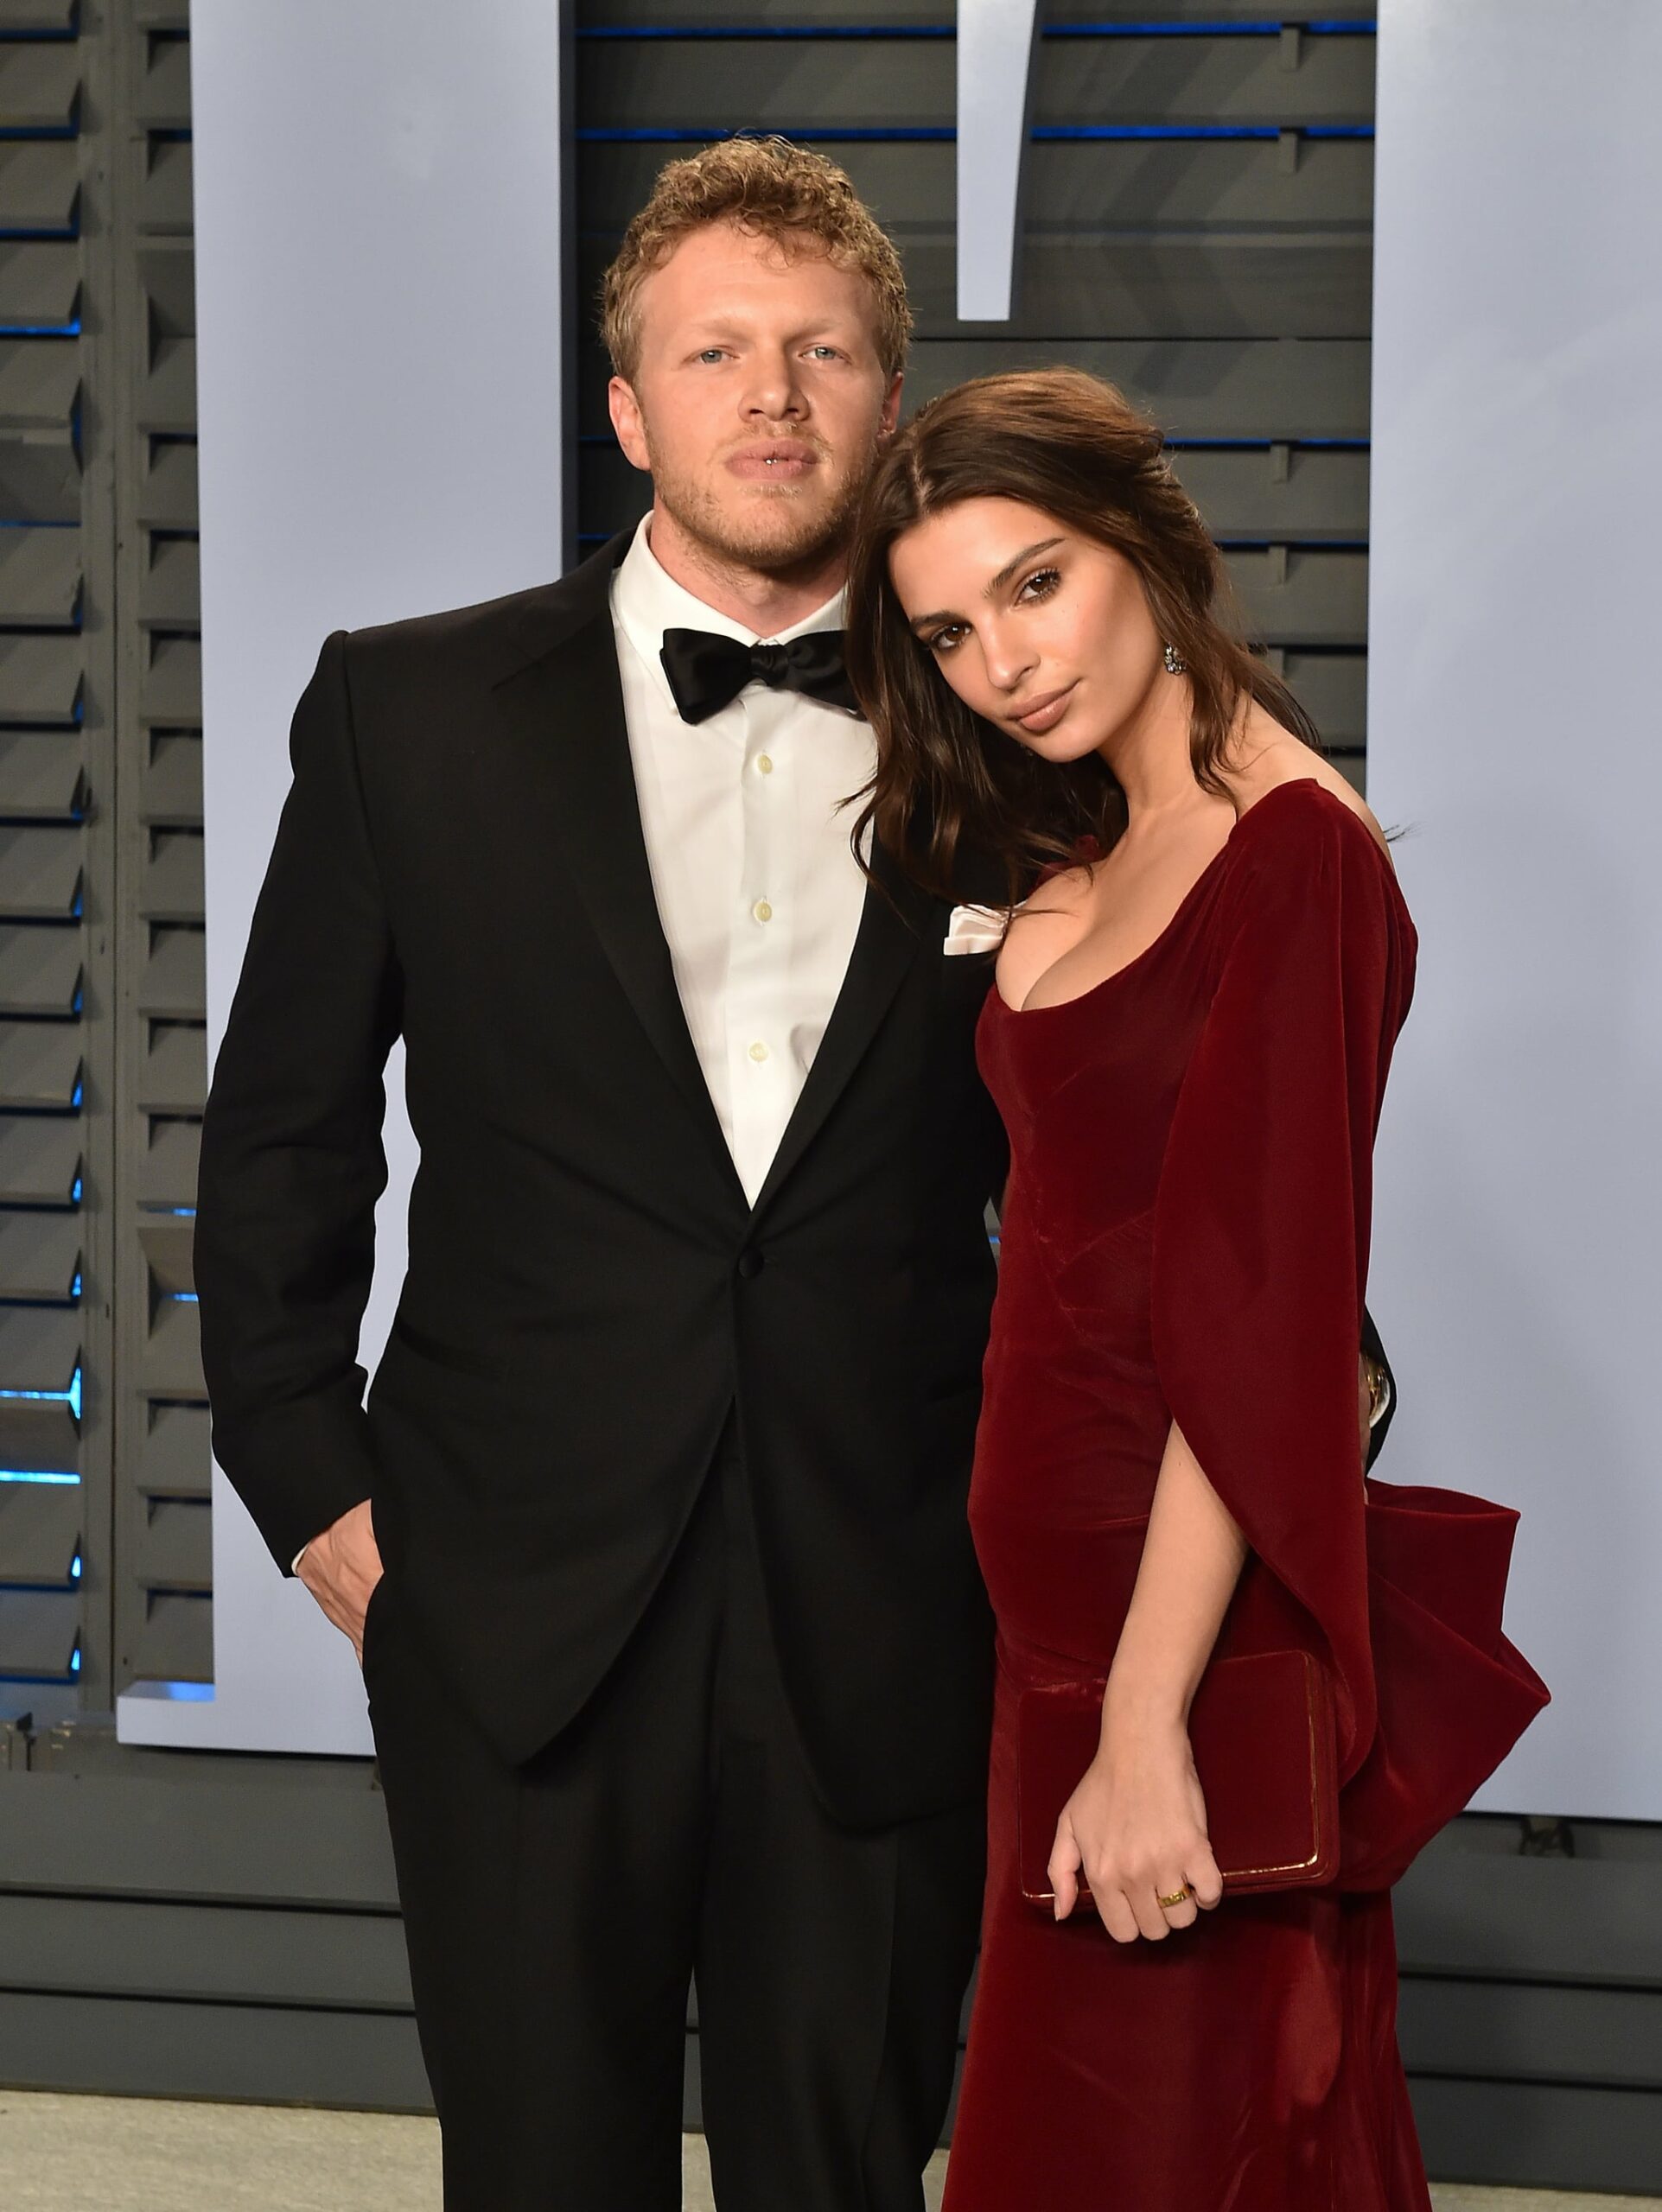 BEVERLY HILLS, CA - MARCH 04:  Actors Sebastian Bear-McClard (L) and Emily Ratajkowski attend the 2018 Vanity Fair Oscar Party hosted by Radhika Jones at Wallis Annenberg Center for the Performing Arts on March 4, 2018 in Beverly Hills, California.  (Photo by Axelle/Bauer-Griffin/FilmMagic)